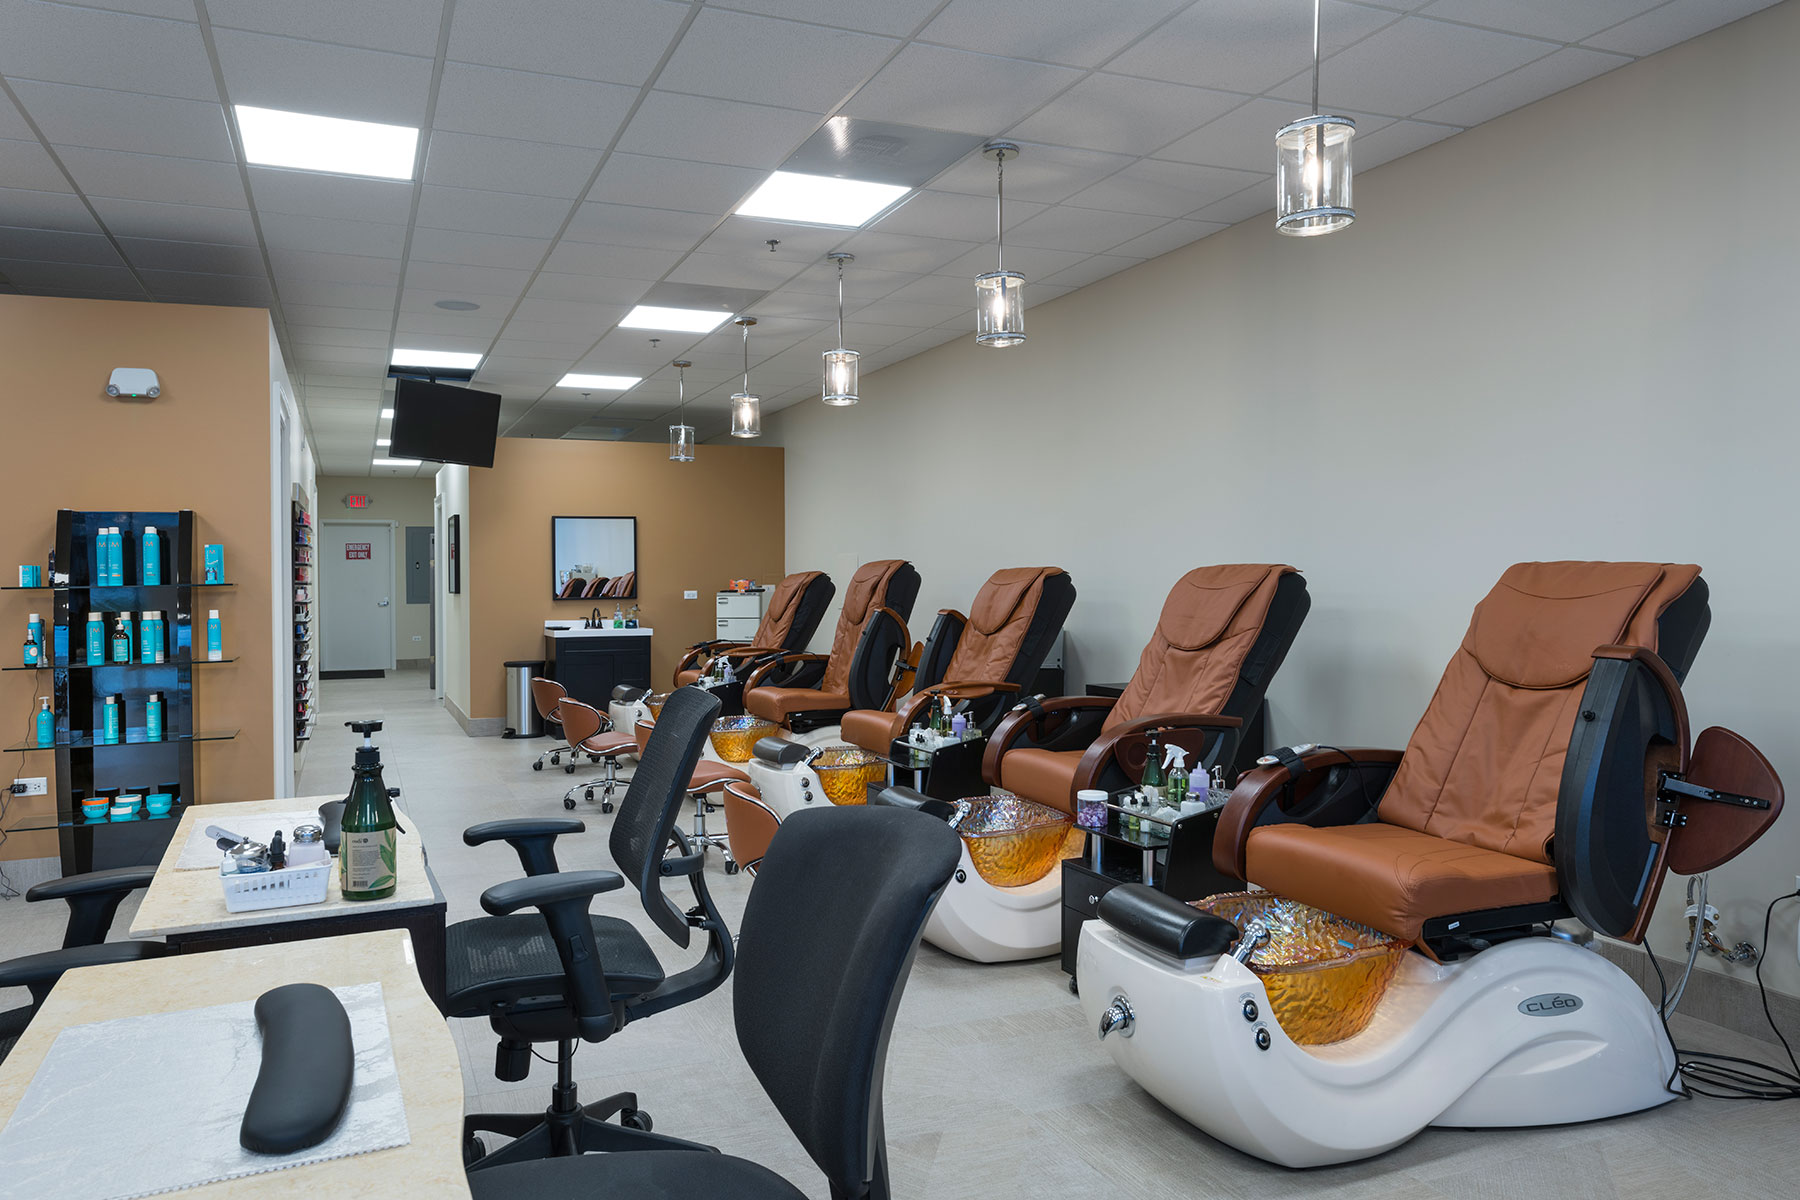 Salon Pedicure Area - Hollywood Trendz Hair & Spa Salon, Addison Custom Home. America's Custom Home Builders: New Construction, Remodeling, Restoration Services. Residential and Commercial.